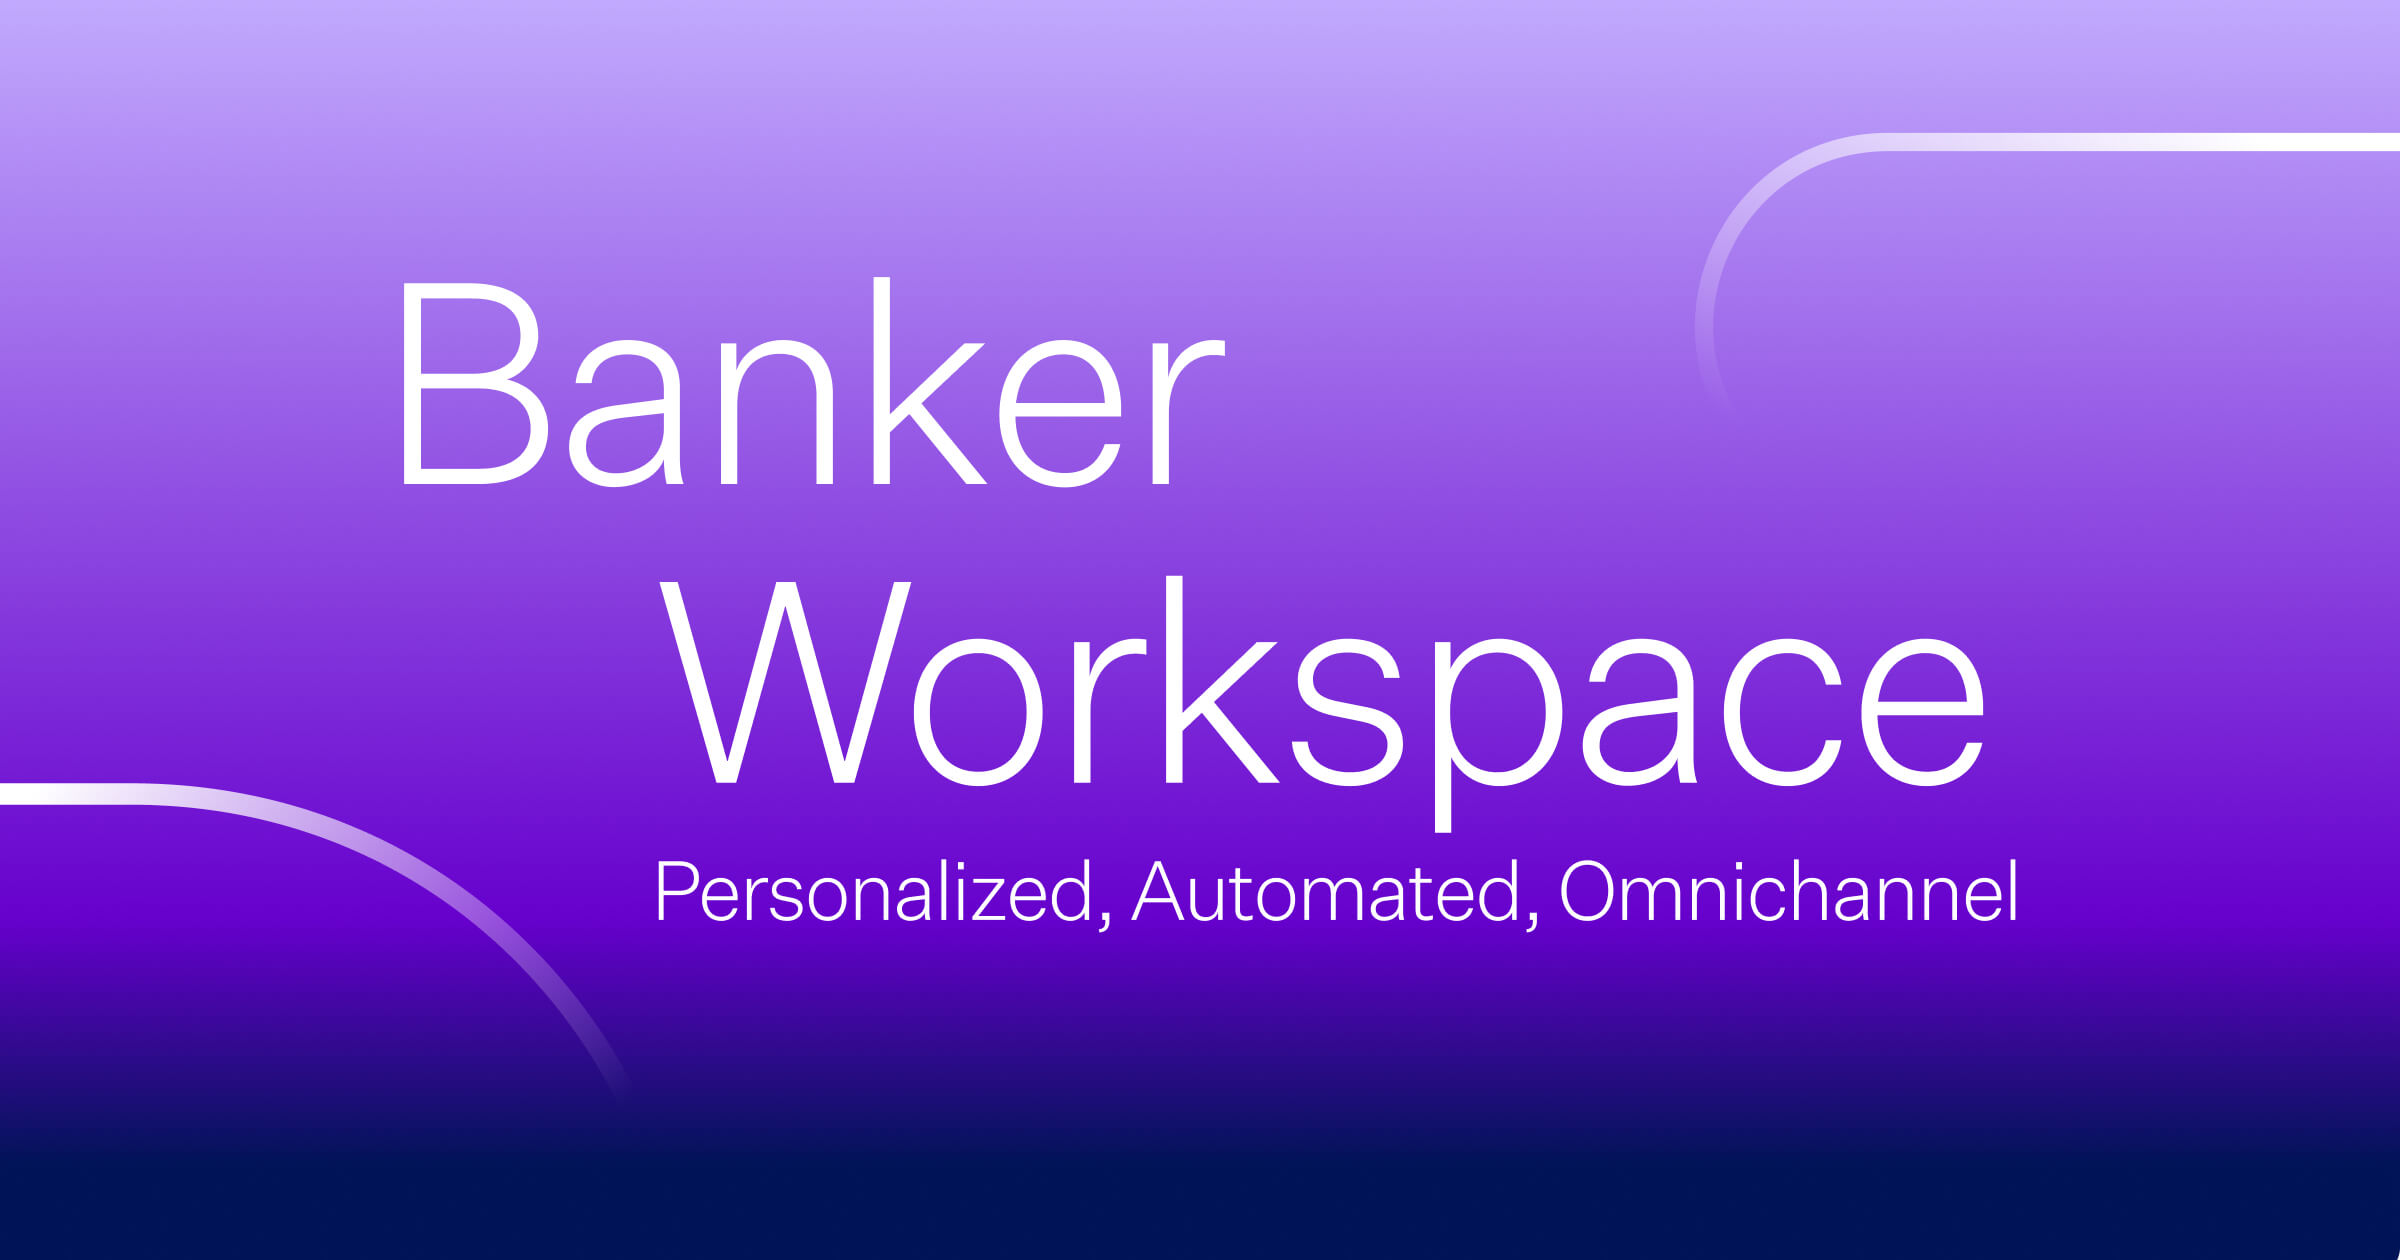 Purple rectangular card that reads "Banker Workspace Personalized, Automated, Omnichannel